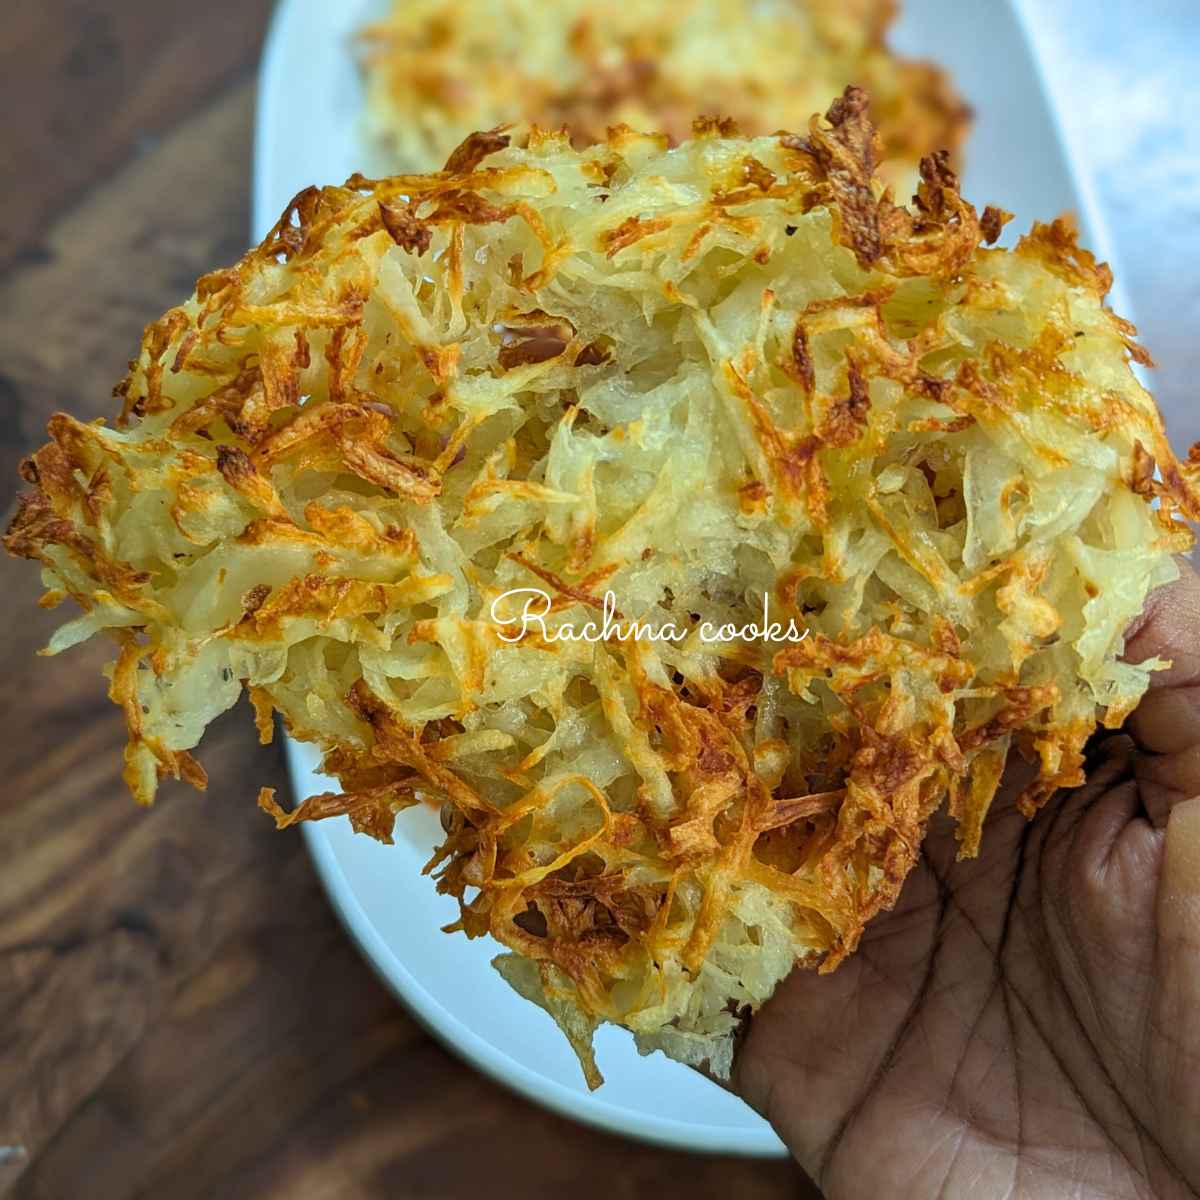 Delicious crispy shredded hash brown after air frying held up in hand.